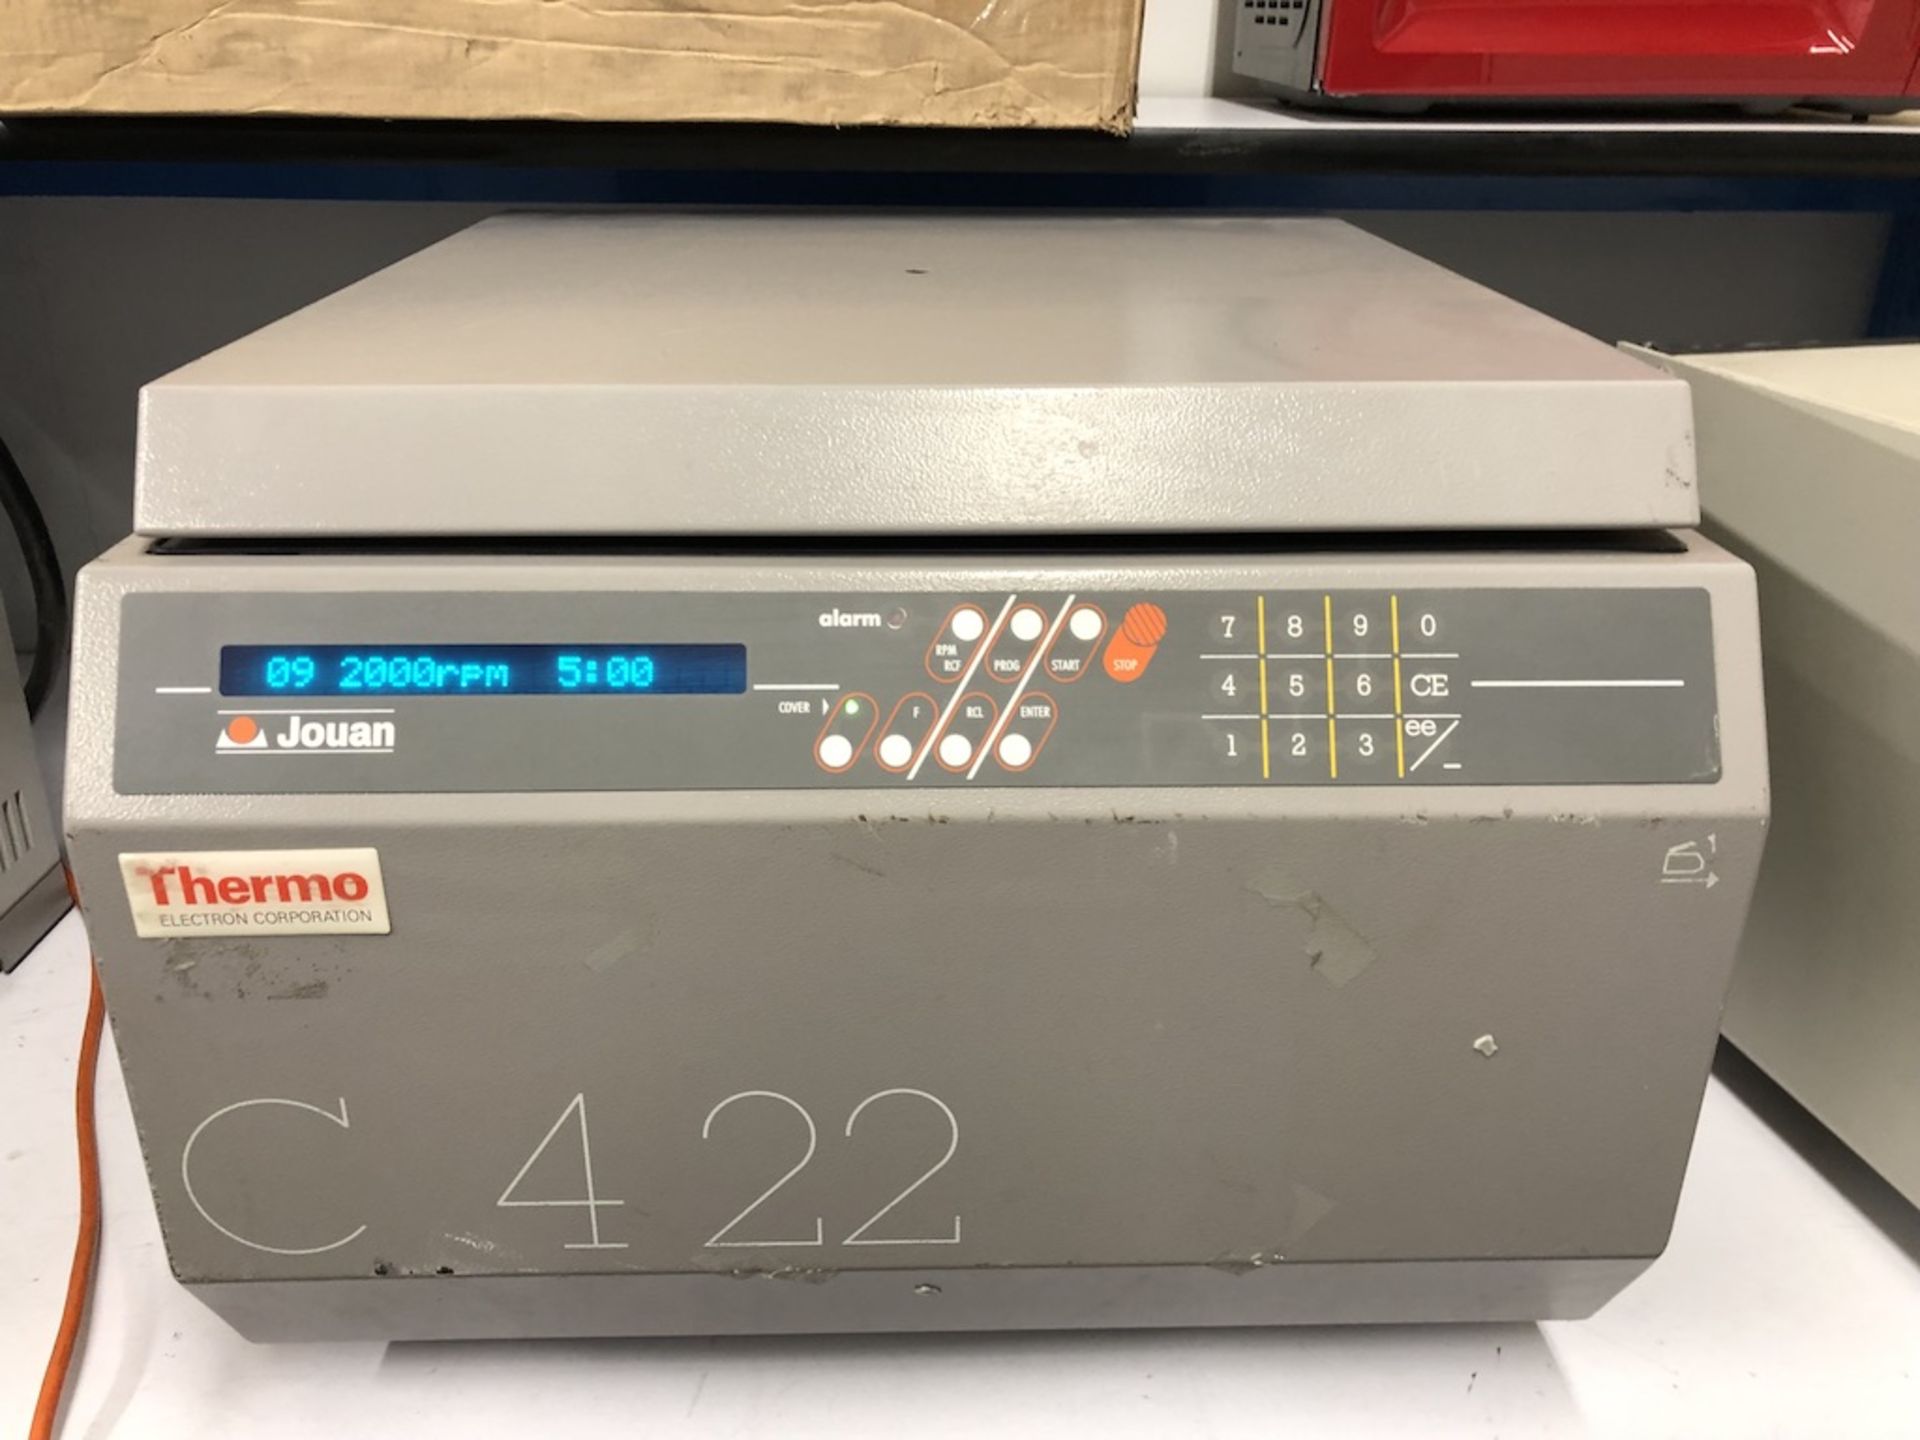 THERMO ELCTRON CORPORATION C4-22 BENCHTOP CENTRIFUGE 120V, 60HZ, 7500 RPM, 11A, CHAMBER DIA 450mm, - Image 4 of 9